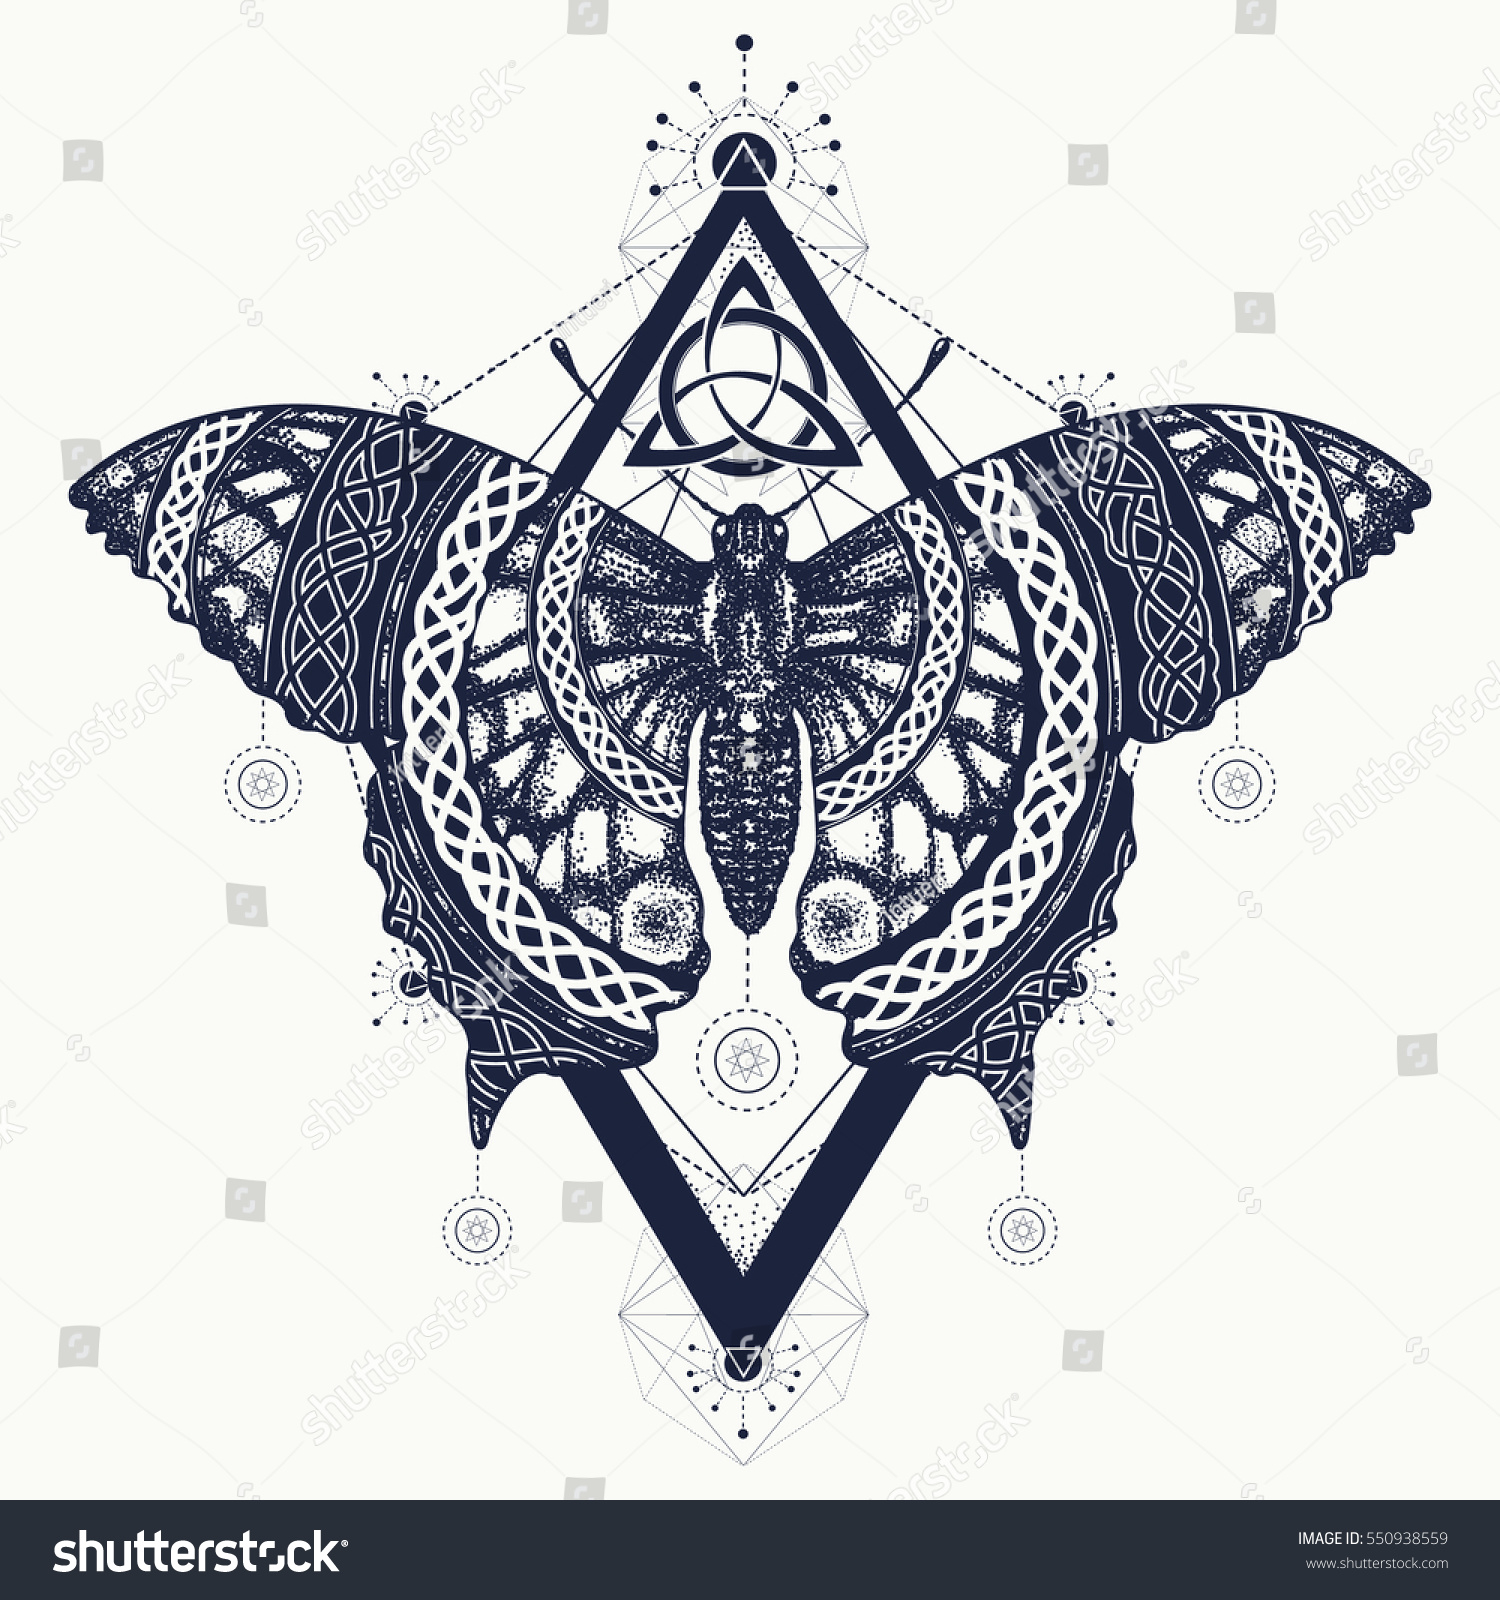 Butterfly Tattoo Art Celtic Style Mystical Stock Vector Royalty inside measurements 1500 X 1600